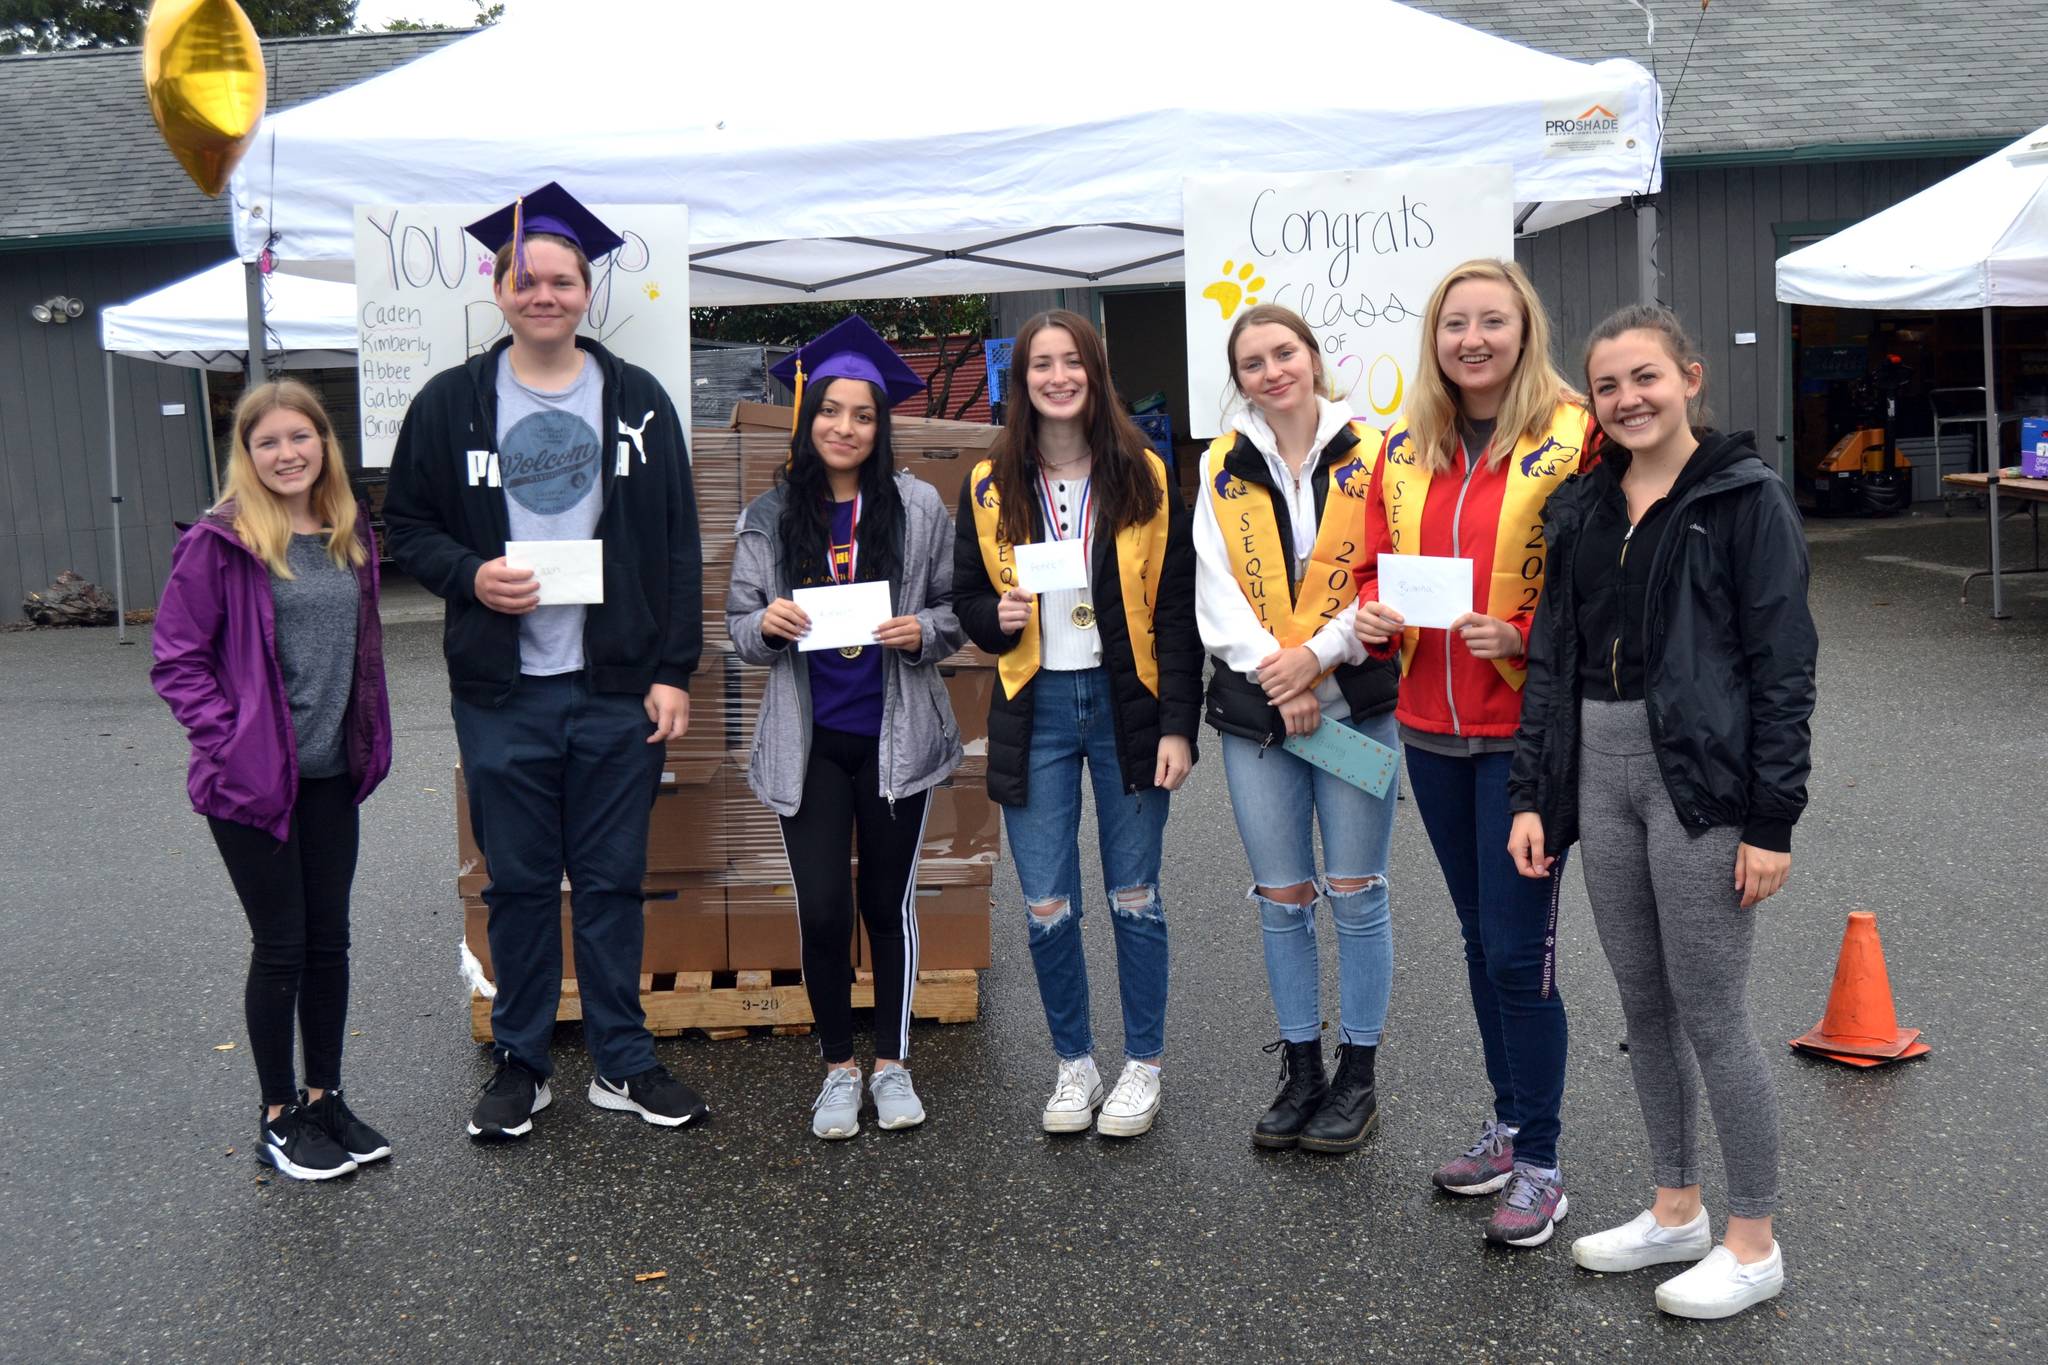 On June 20, JoNell Hill, far left, and Ashley Rosales, far right, presented $100 each on behalf of Stephen and Kim Rosales to recent Sequim High School graduates, from second left, Caden Habner, Kimberly Perez, Abbee Jagger, Gabby Happe, and Brianna Cowan for spending Saturday mornings at the Sequim Food Bank as volunteers. Sequim Gazette photo by Matthew Nash